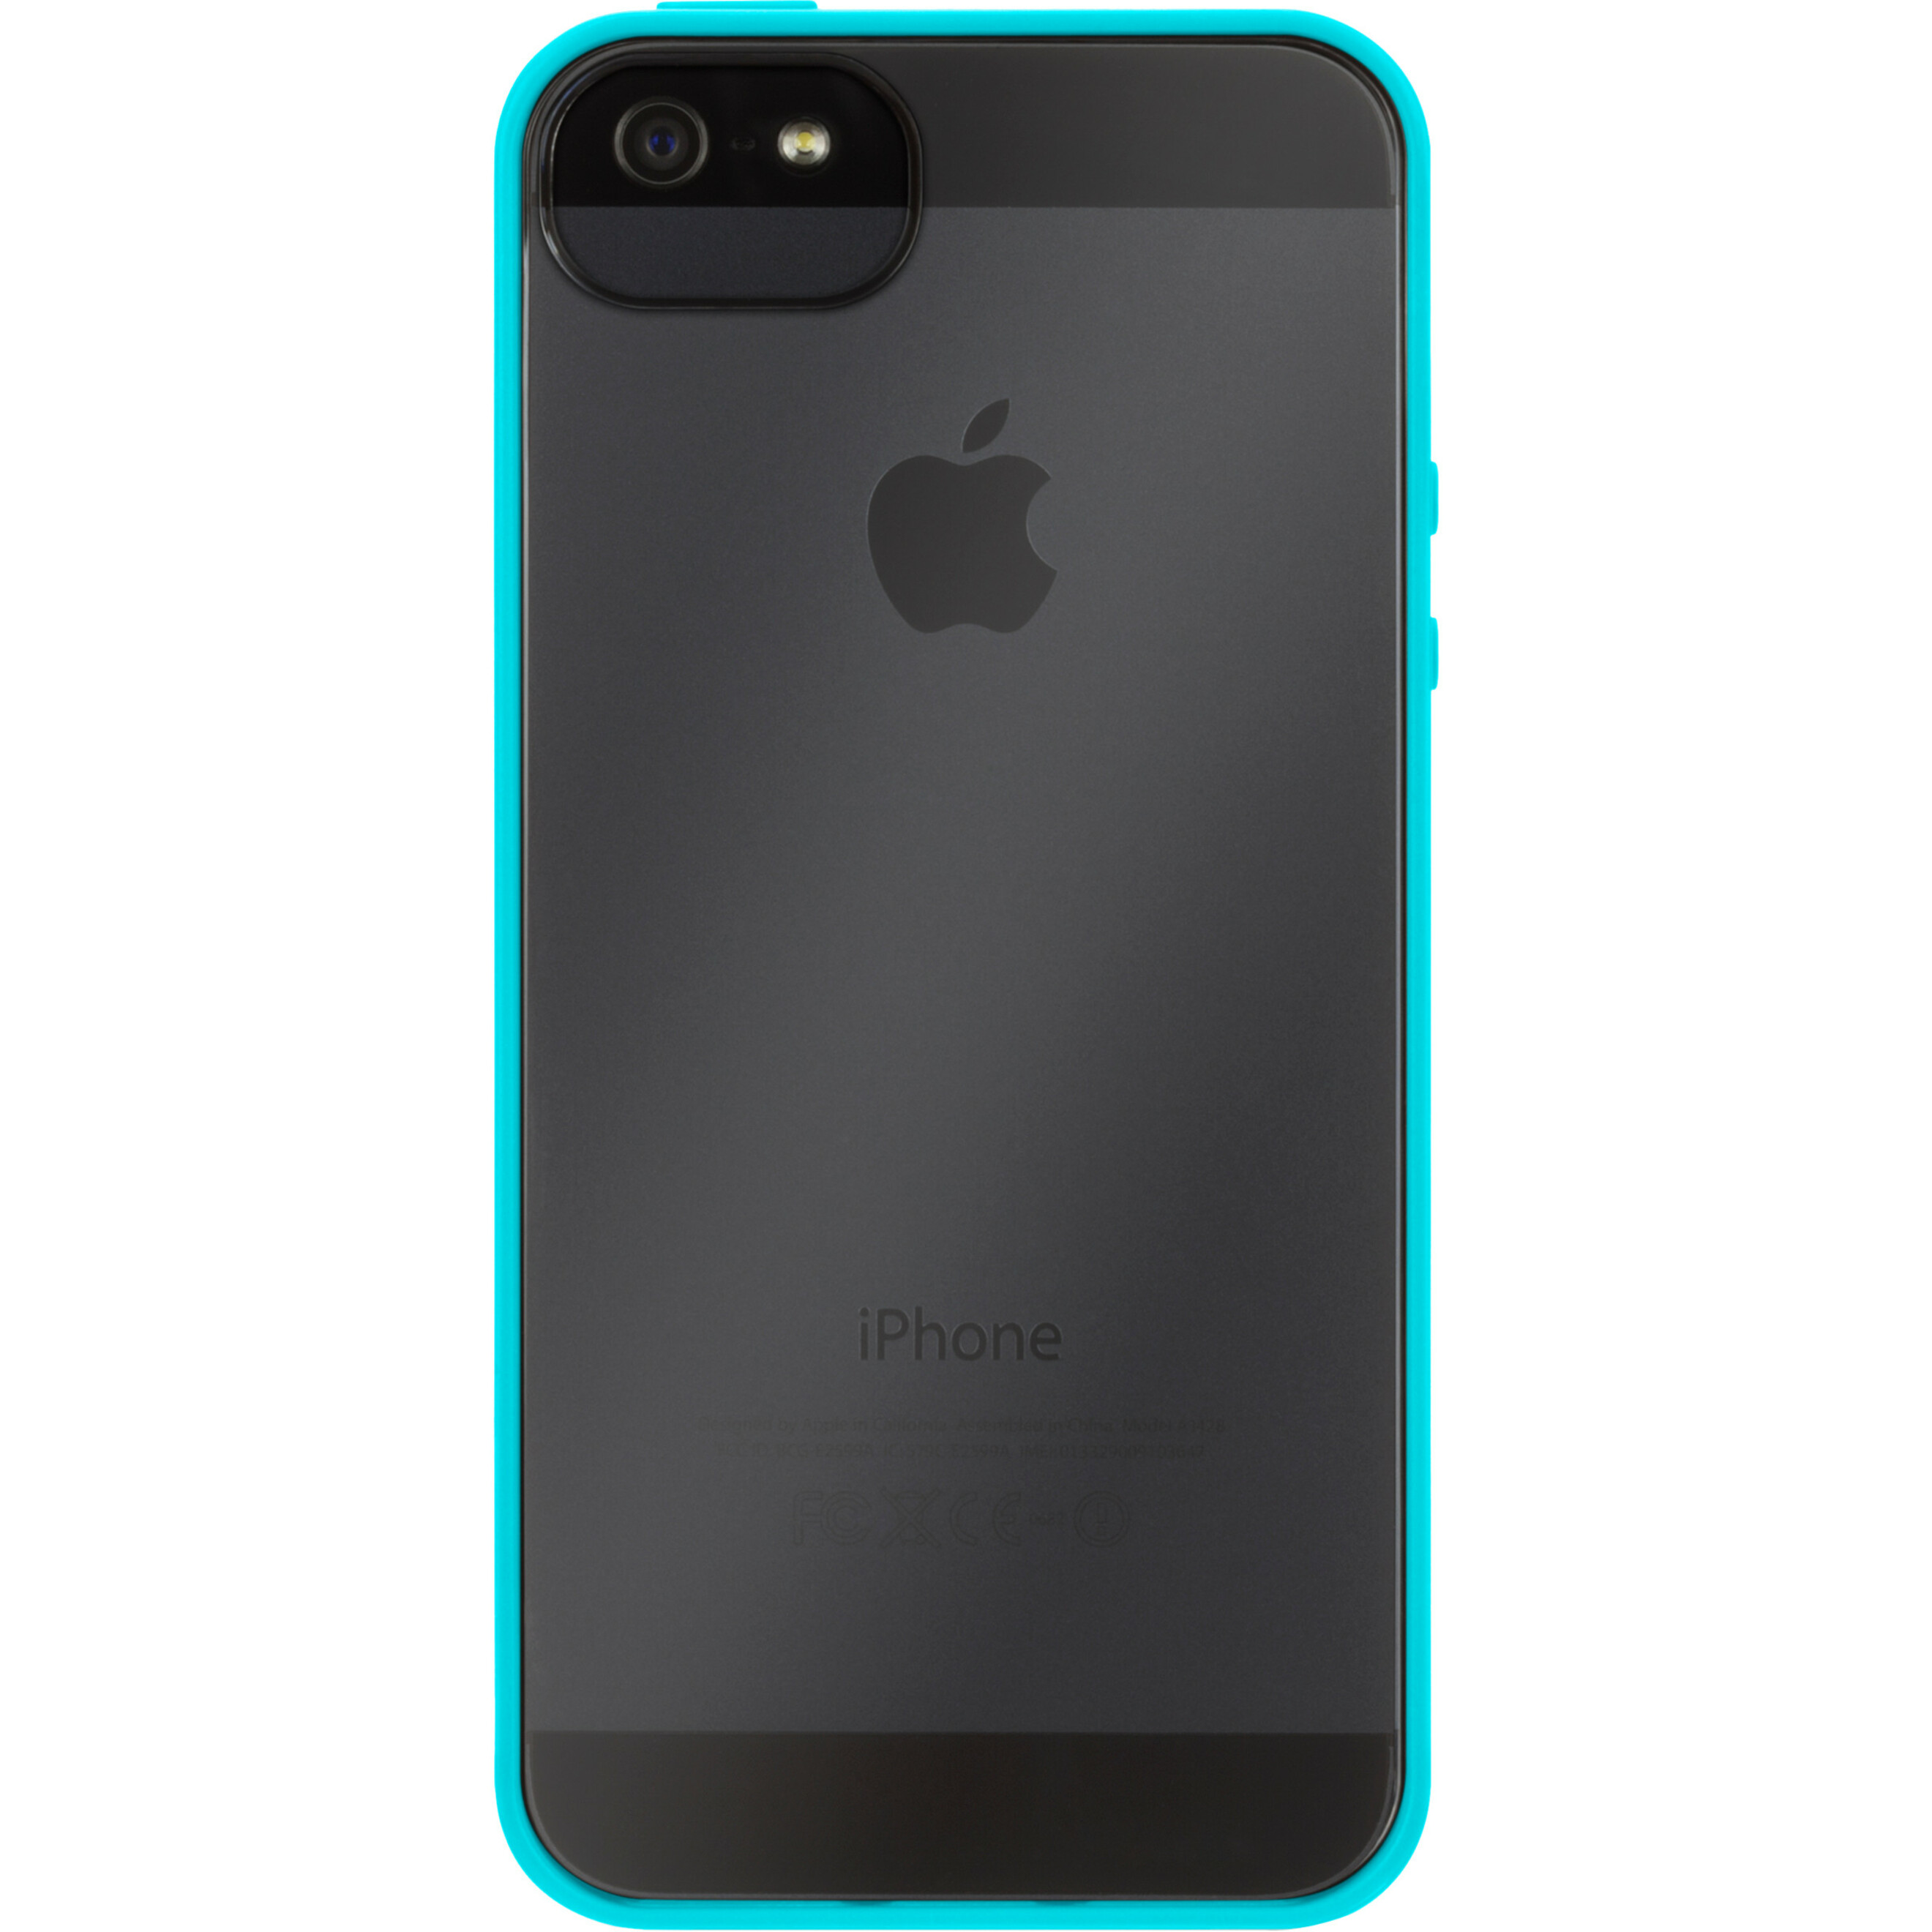 Griffin Reveal Case for iPhone 5/5S - image 4 of 5